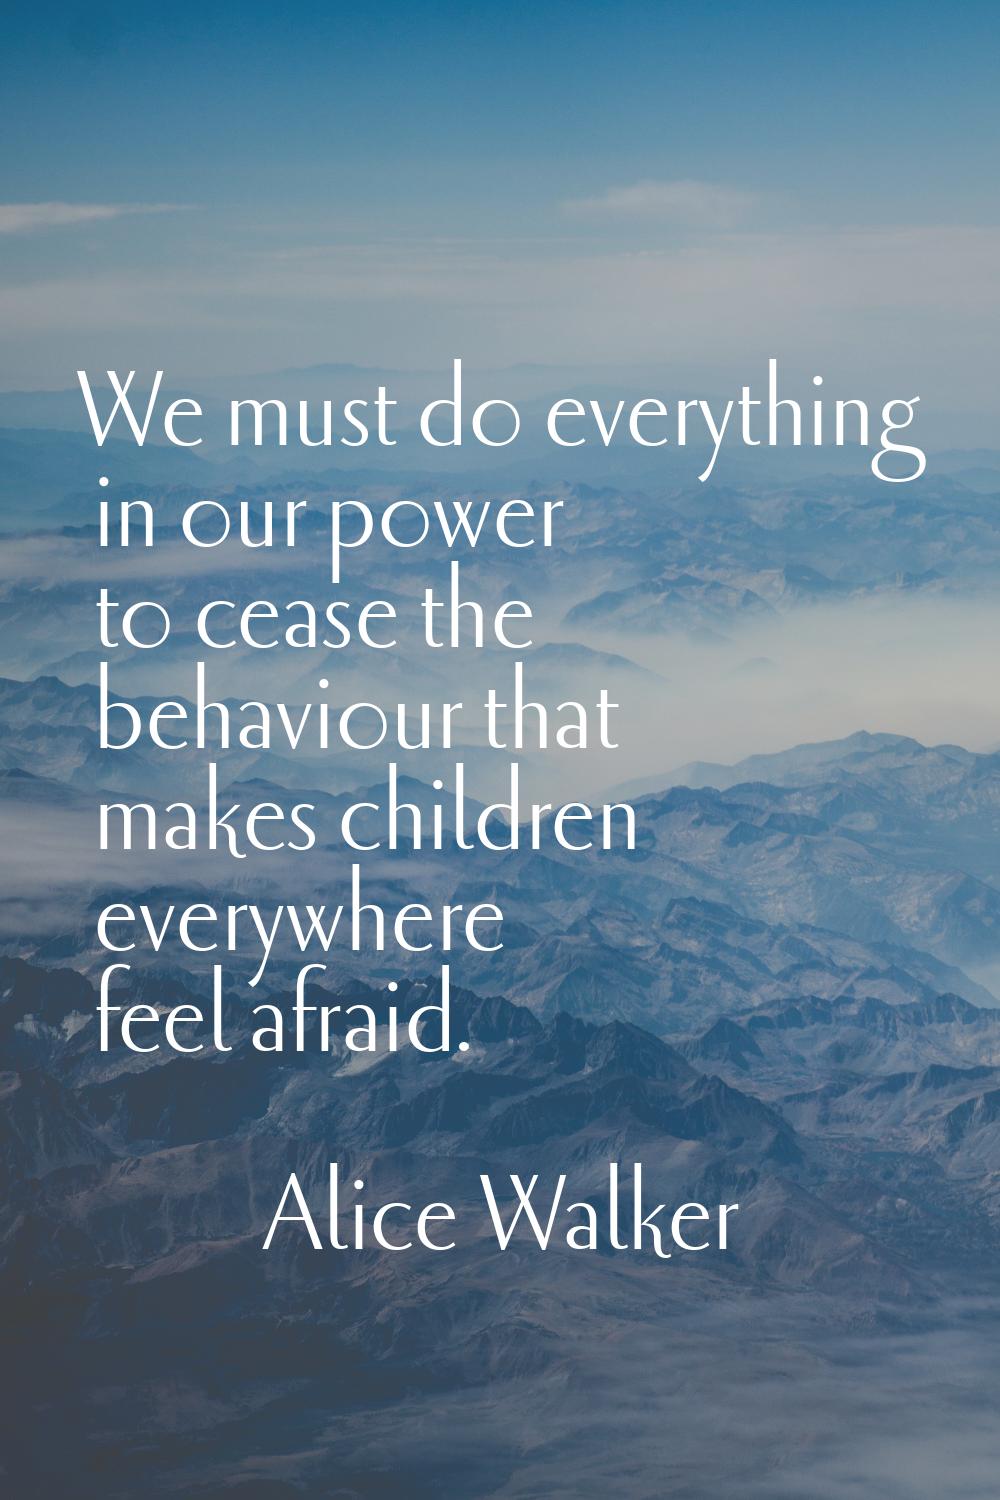 We must do everything in our power to cease the behaviour that makes children everywhere feel afrai